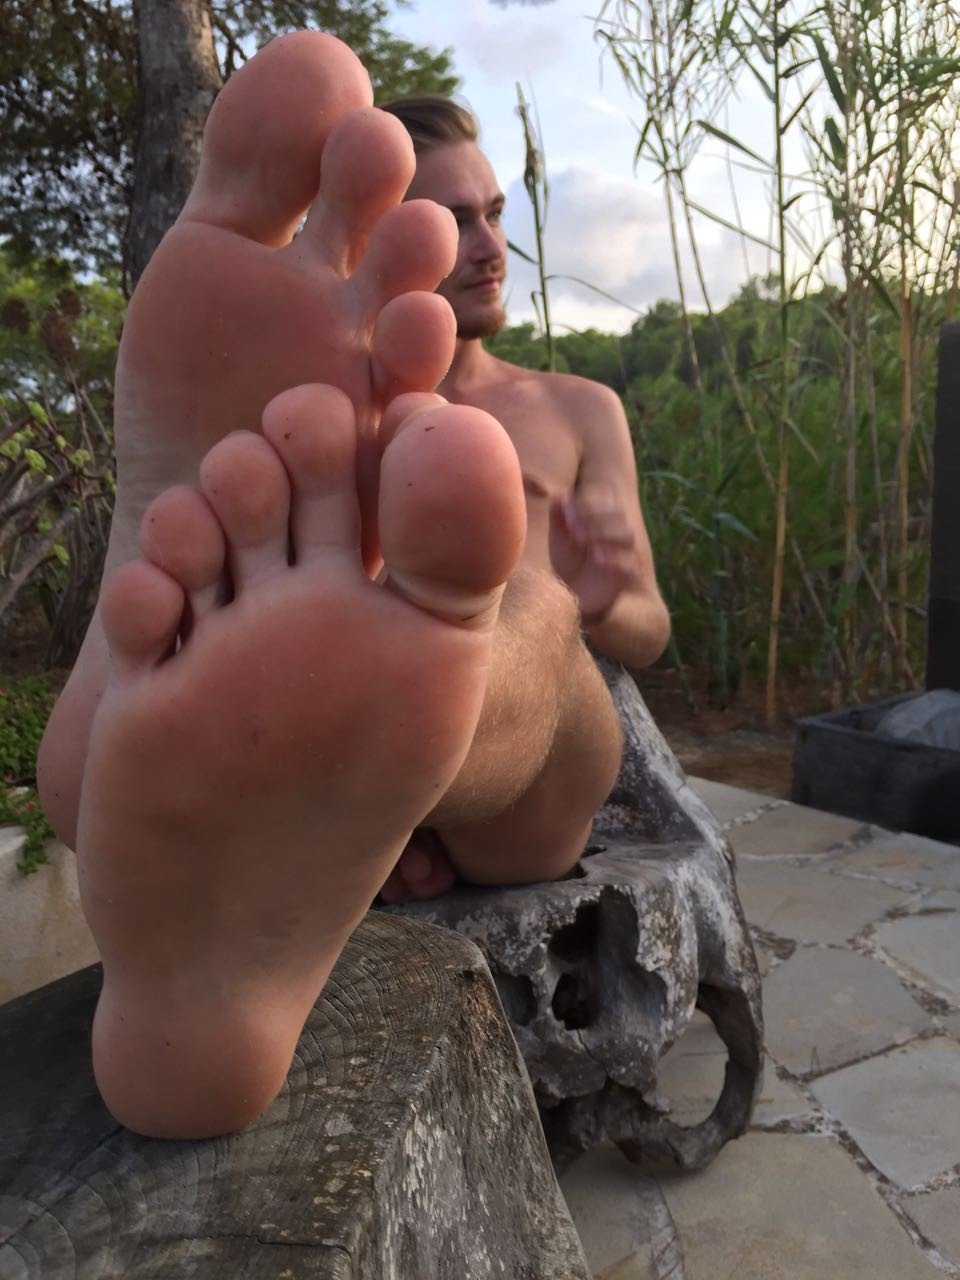 Photo by puppy-lex with the username @puppy-lex, who is a verified user,  December 2, 2017 at 10:49 AM and the text says '#gay  #schwul  #nackt  #nude  #nudist  #zeigegeil  #ibiza  #sommer  #summer  #barefoot  #foot  #Füße  #barfuß'